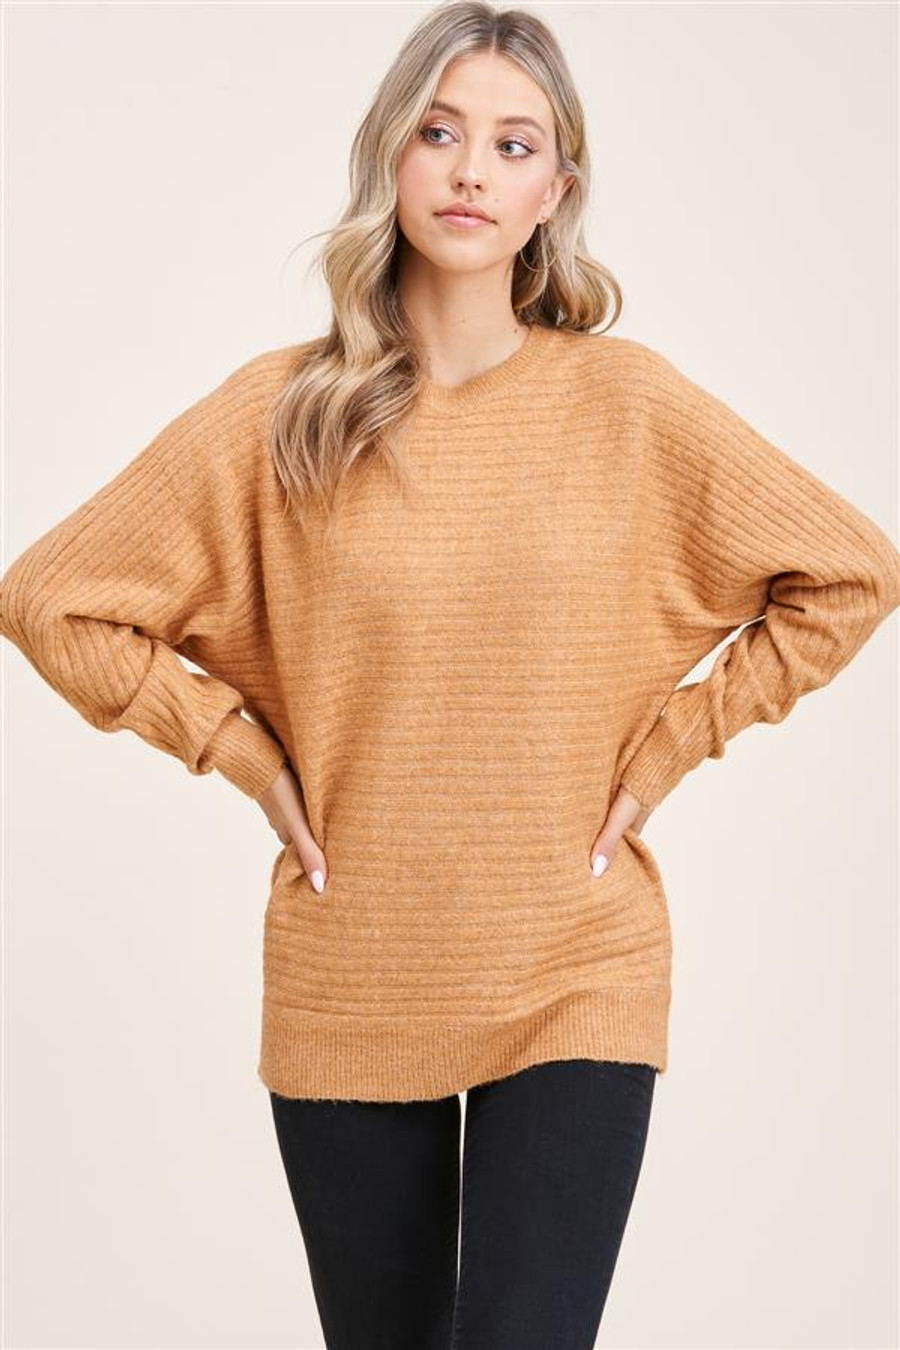 Staccato Ribbed Dolman Sleeve Sweater Cardigan - Amber